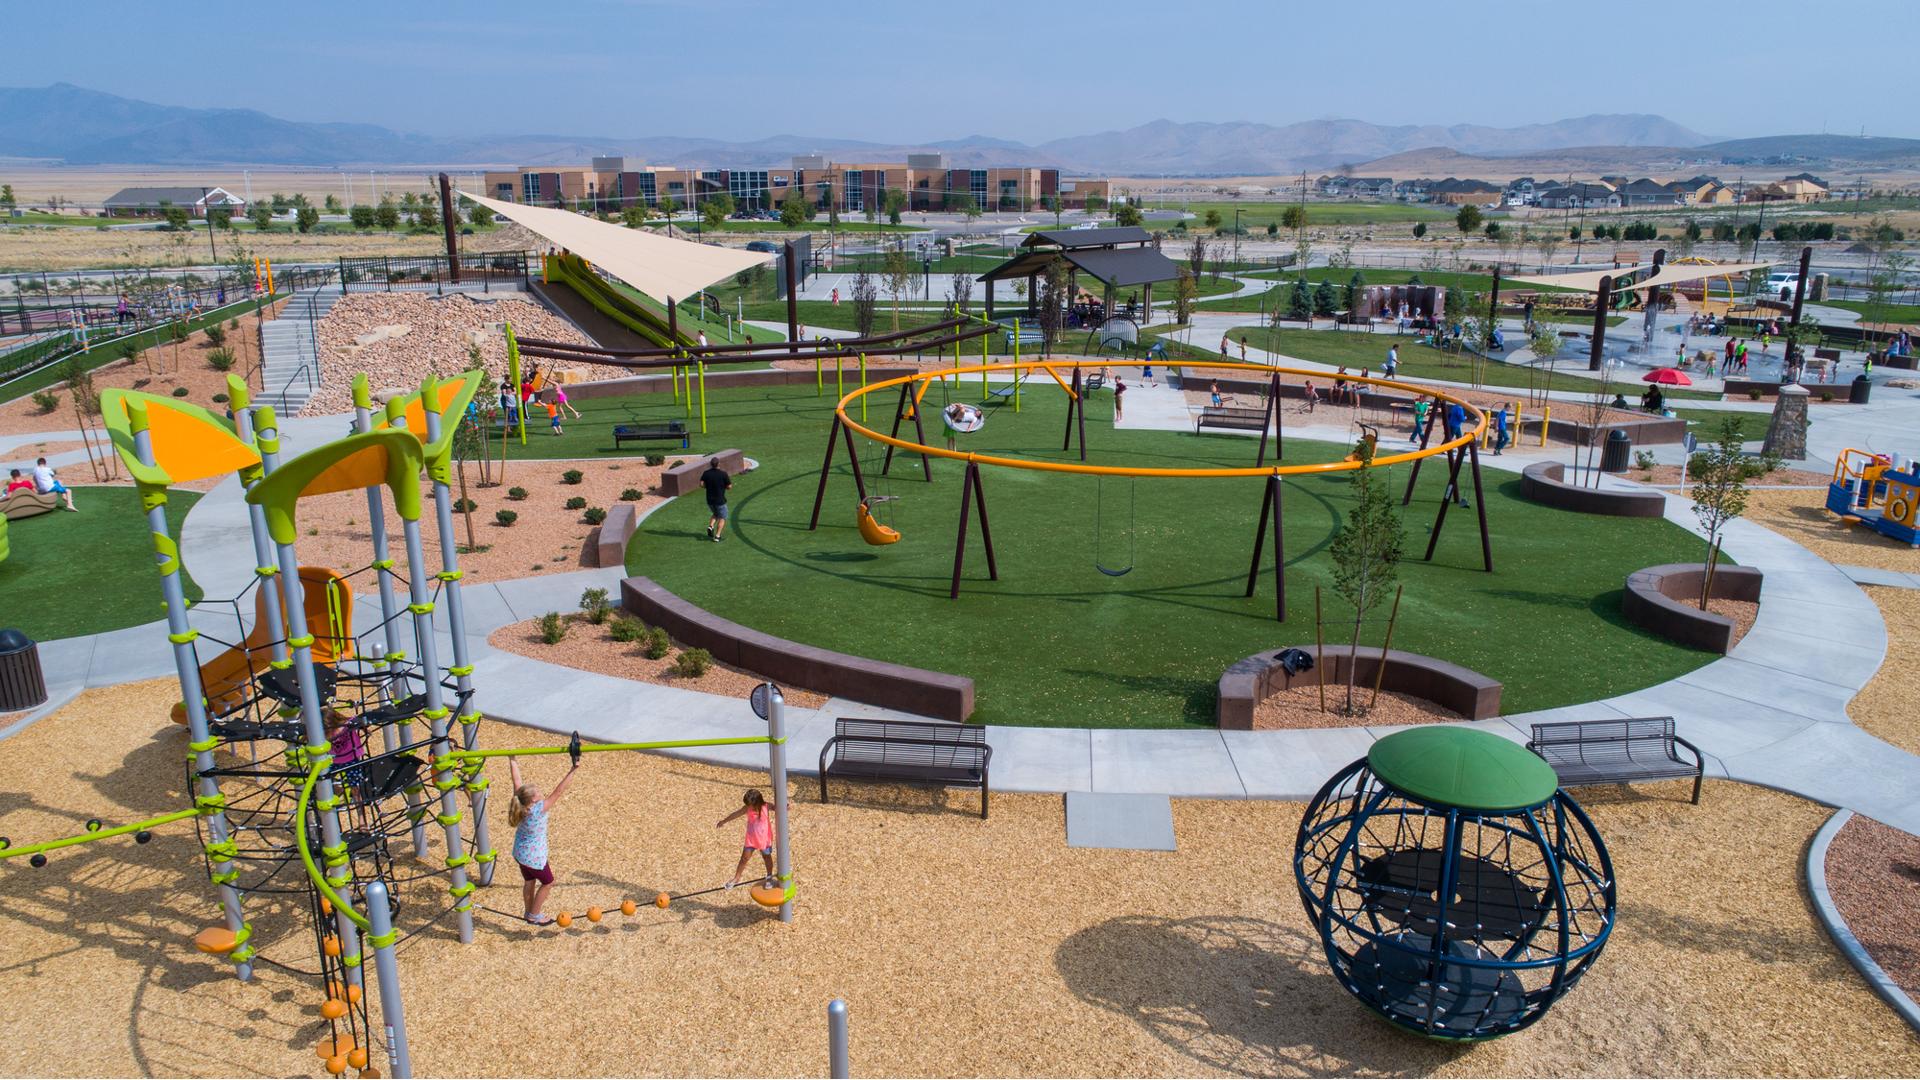 Cory B. Wride Memorial Park features a Netplex® play structure, Global Motion®, Sway Fun® glider as well as a play structure designed for toddlers and preschoolers. Visitors will meet a Mobius®, Aeronet® and AdventureScapes® climbers. And hillside climbers and slides are covered with a SkyWays® shade structure.